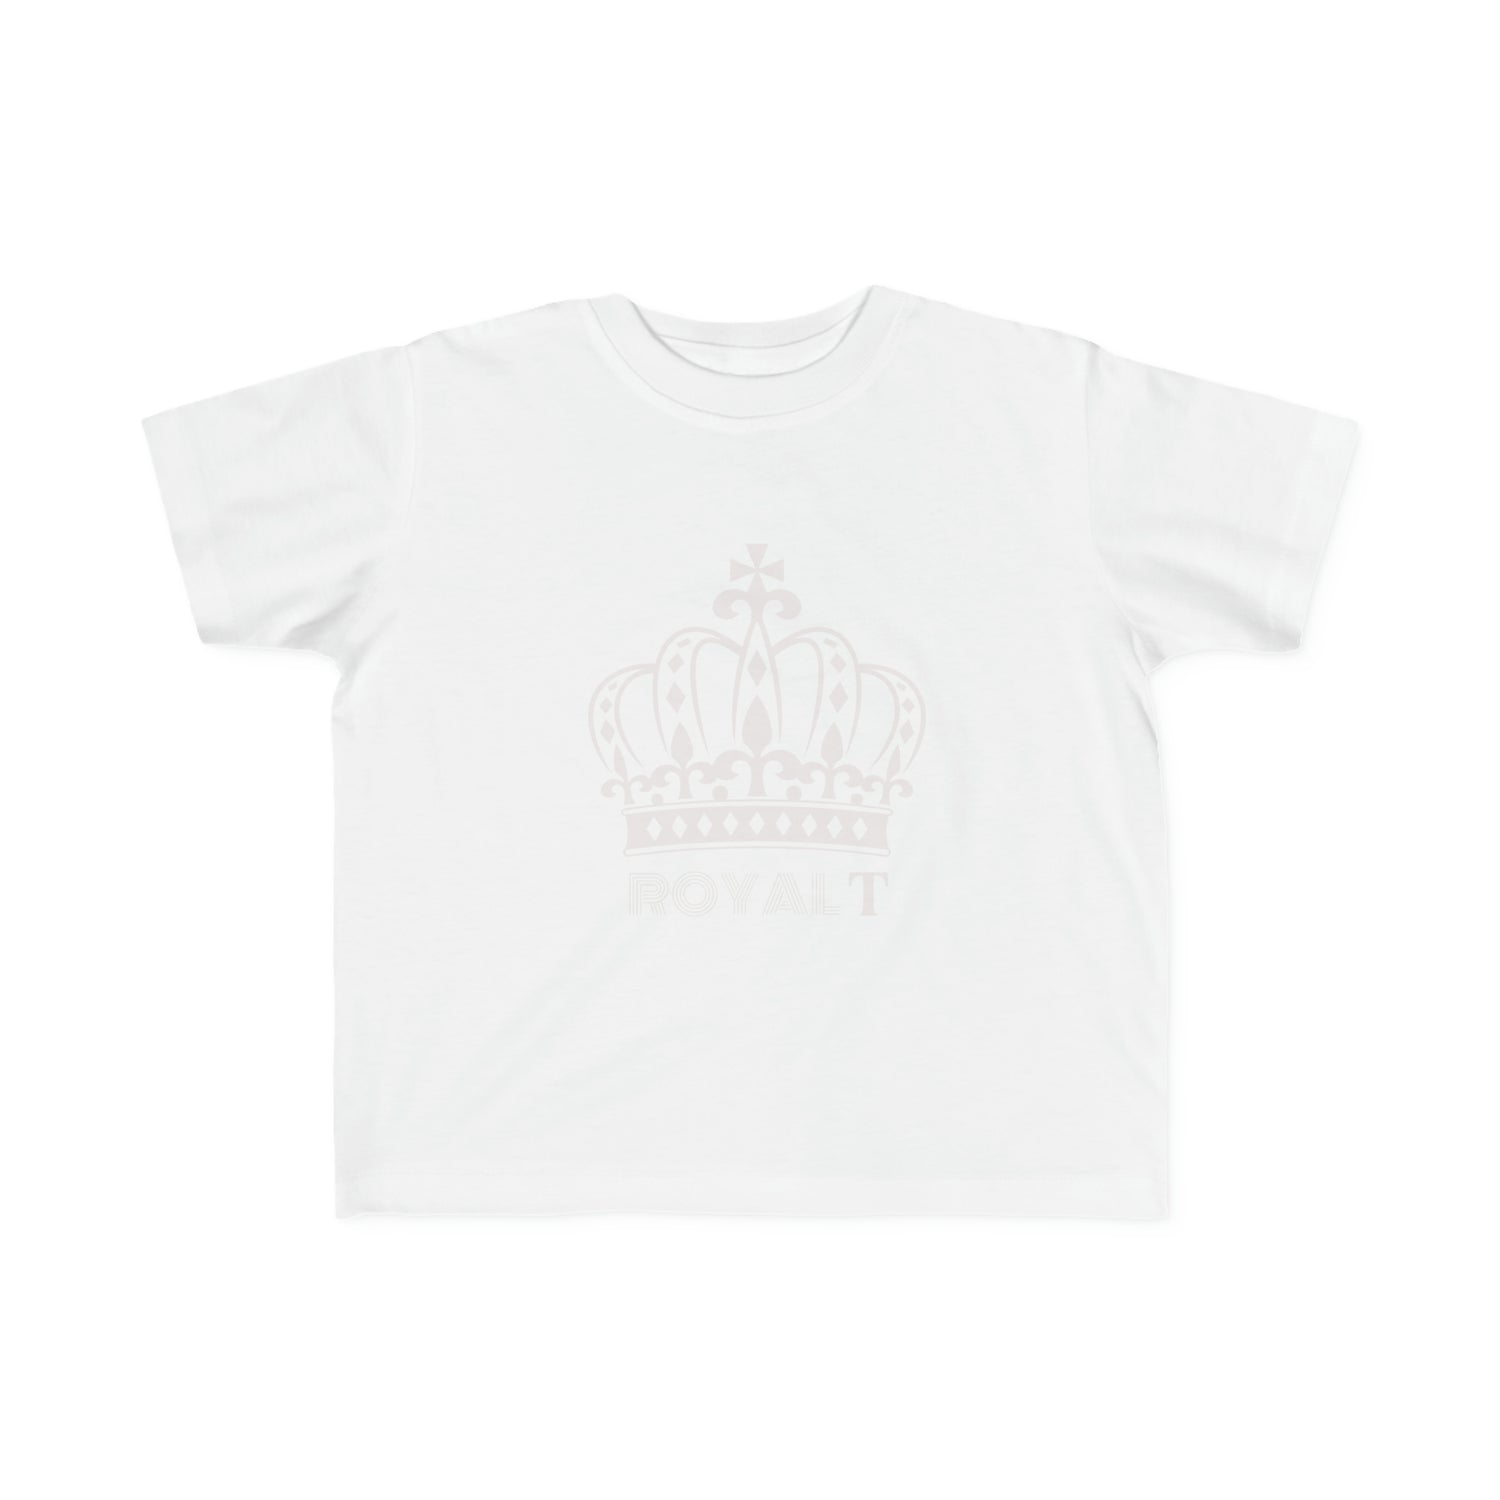 Toddlers Royal T